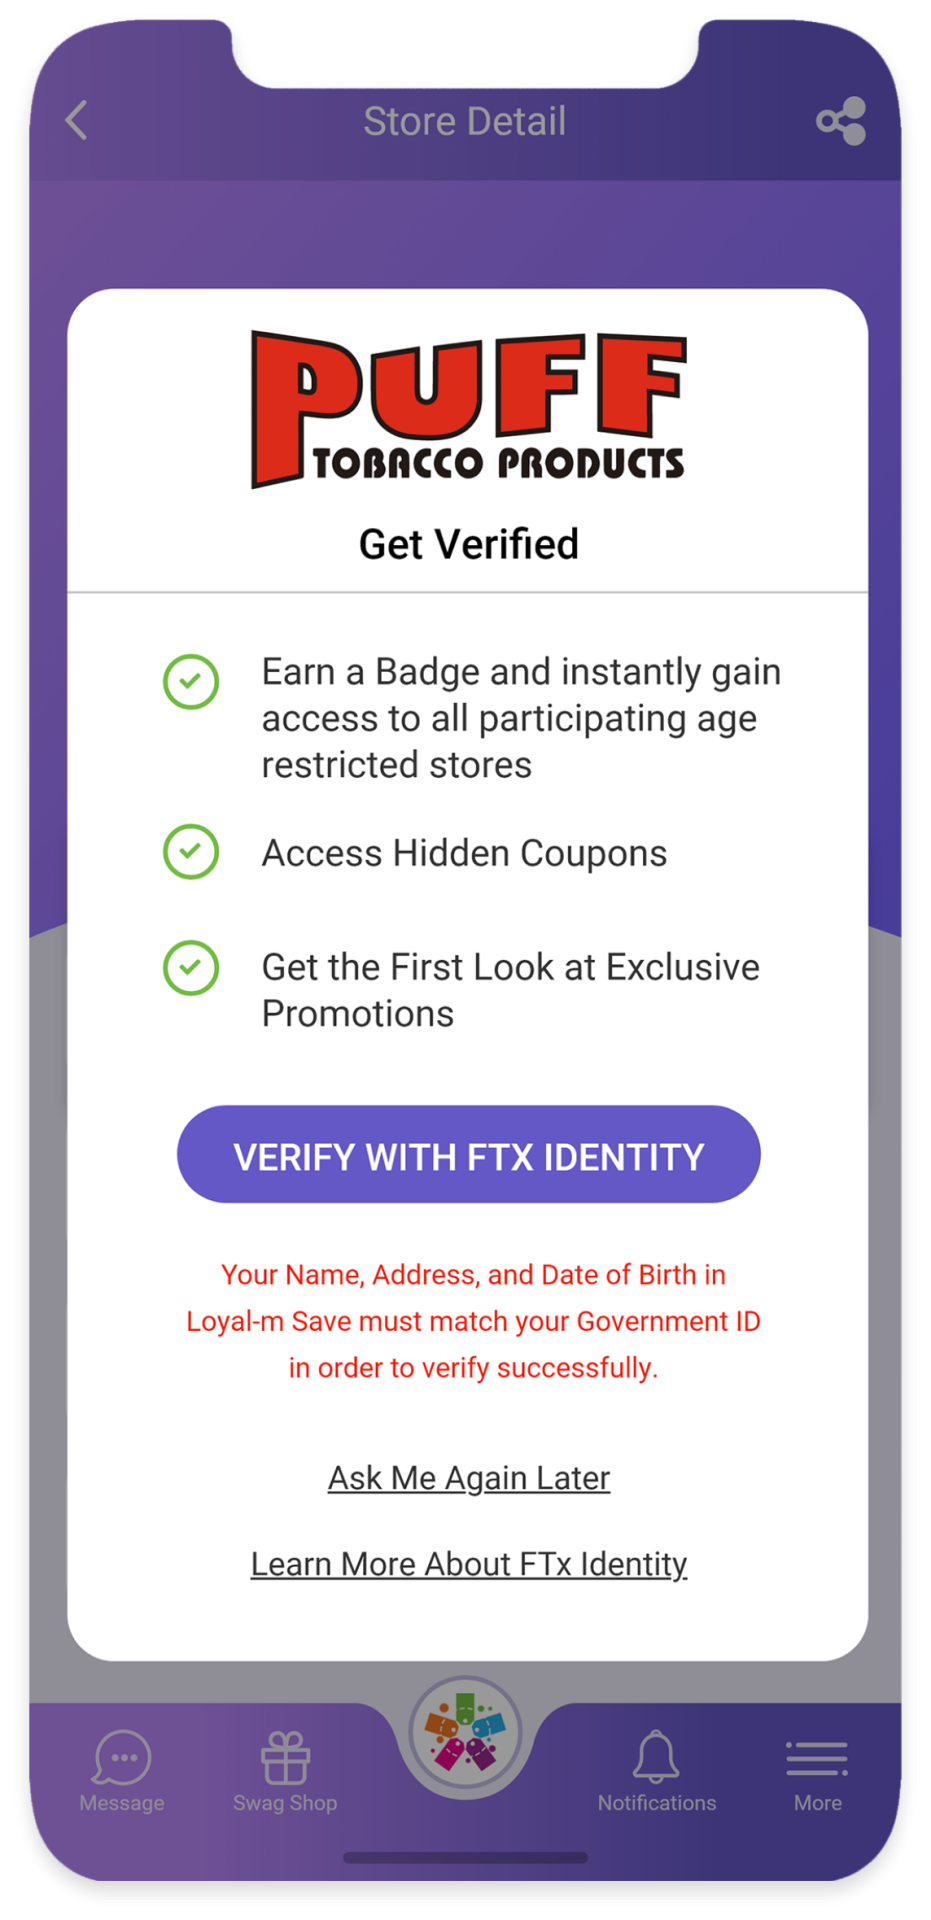 Read & accept the policy terms and click verify with FTx Identity